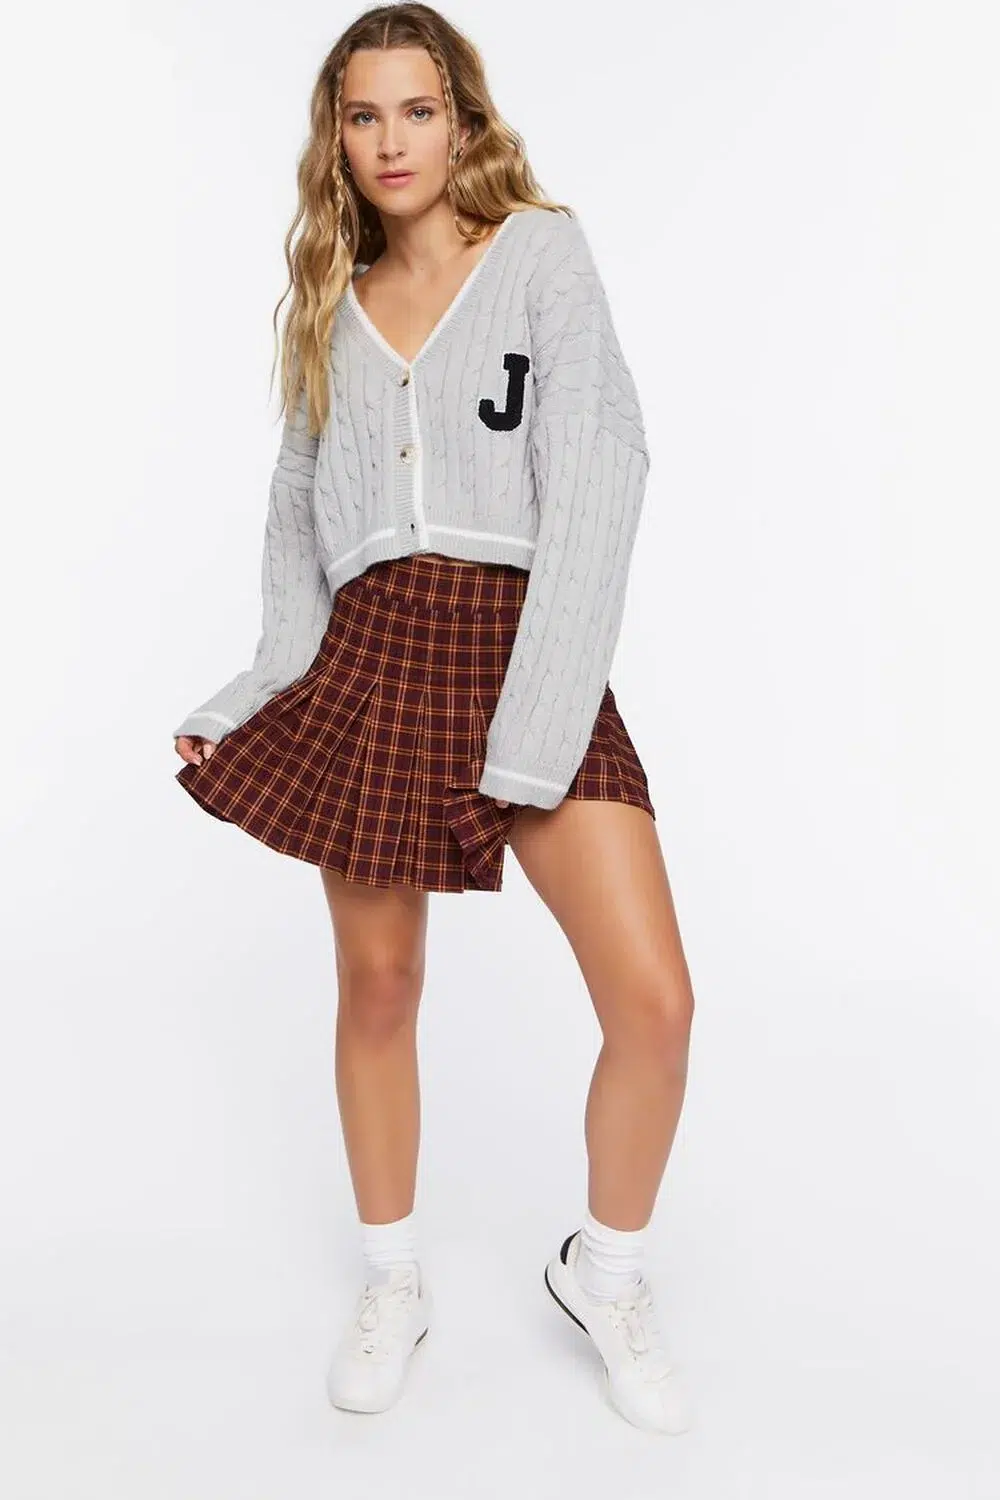 The 12 Best Plaid Skirts to Buy This Season